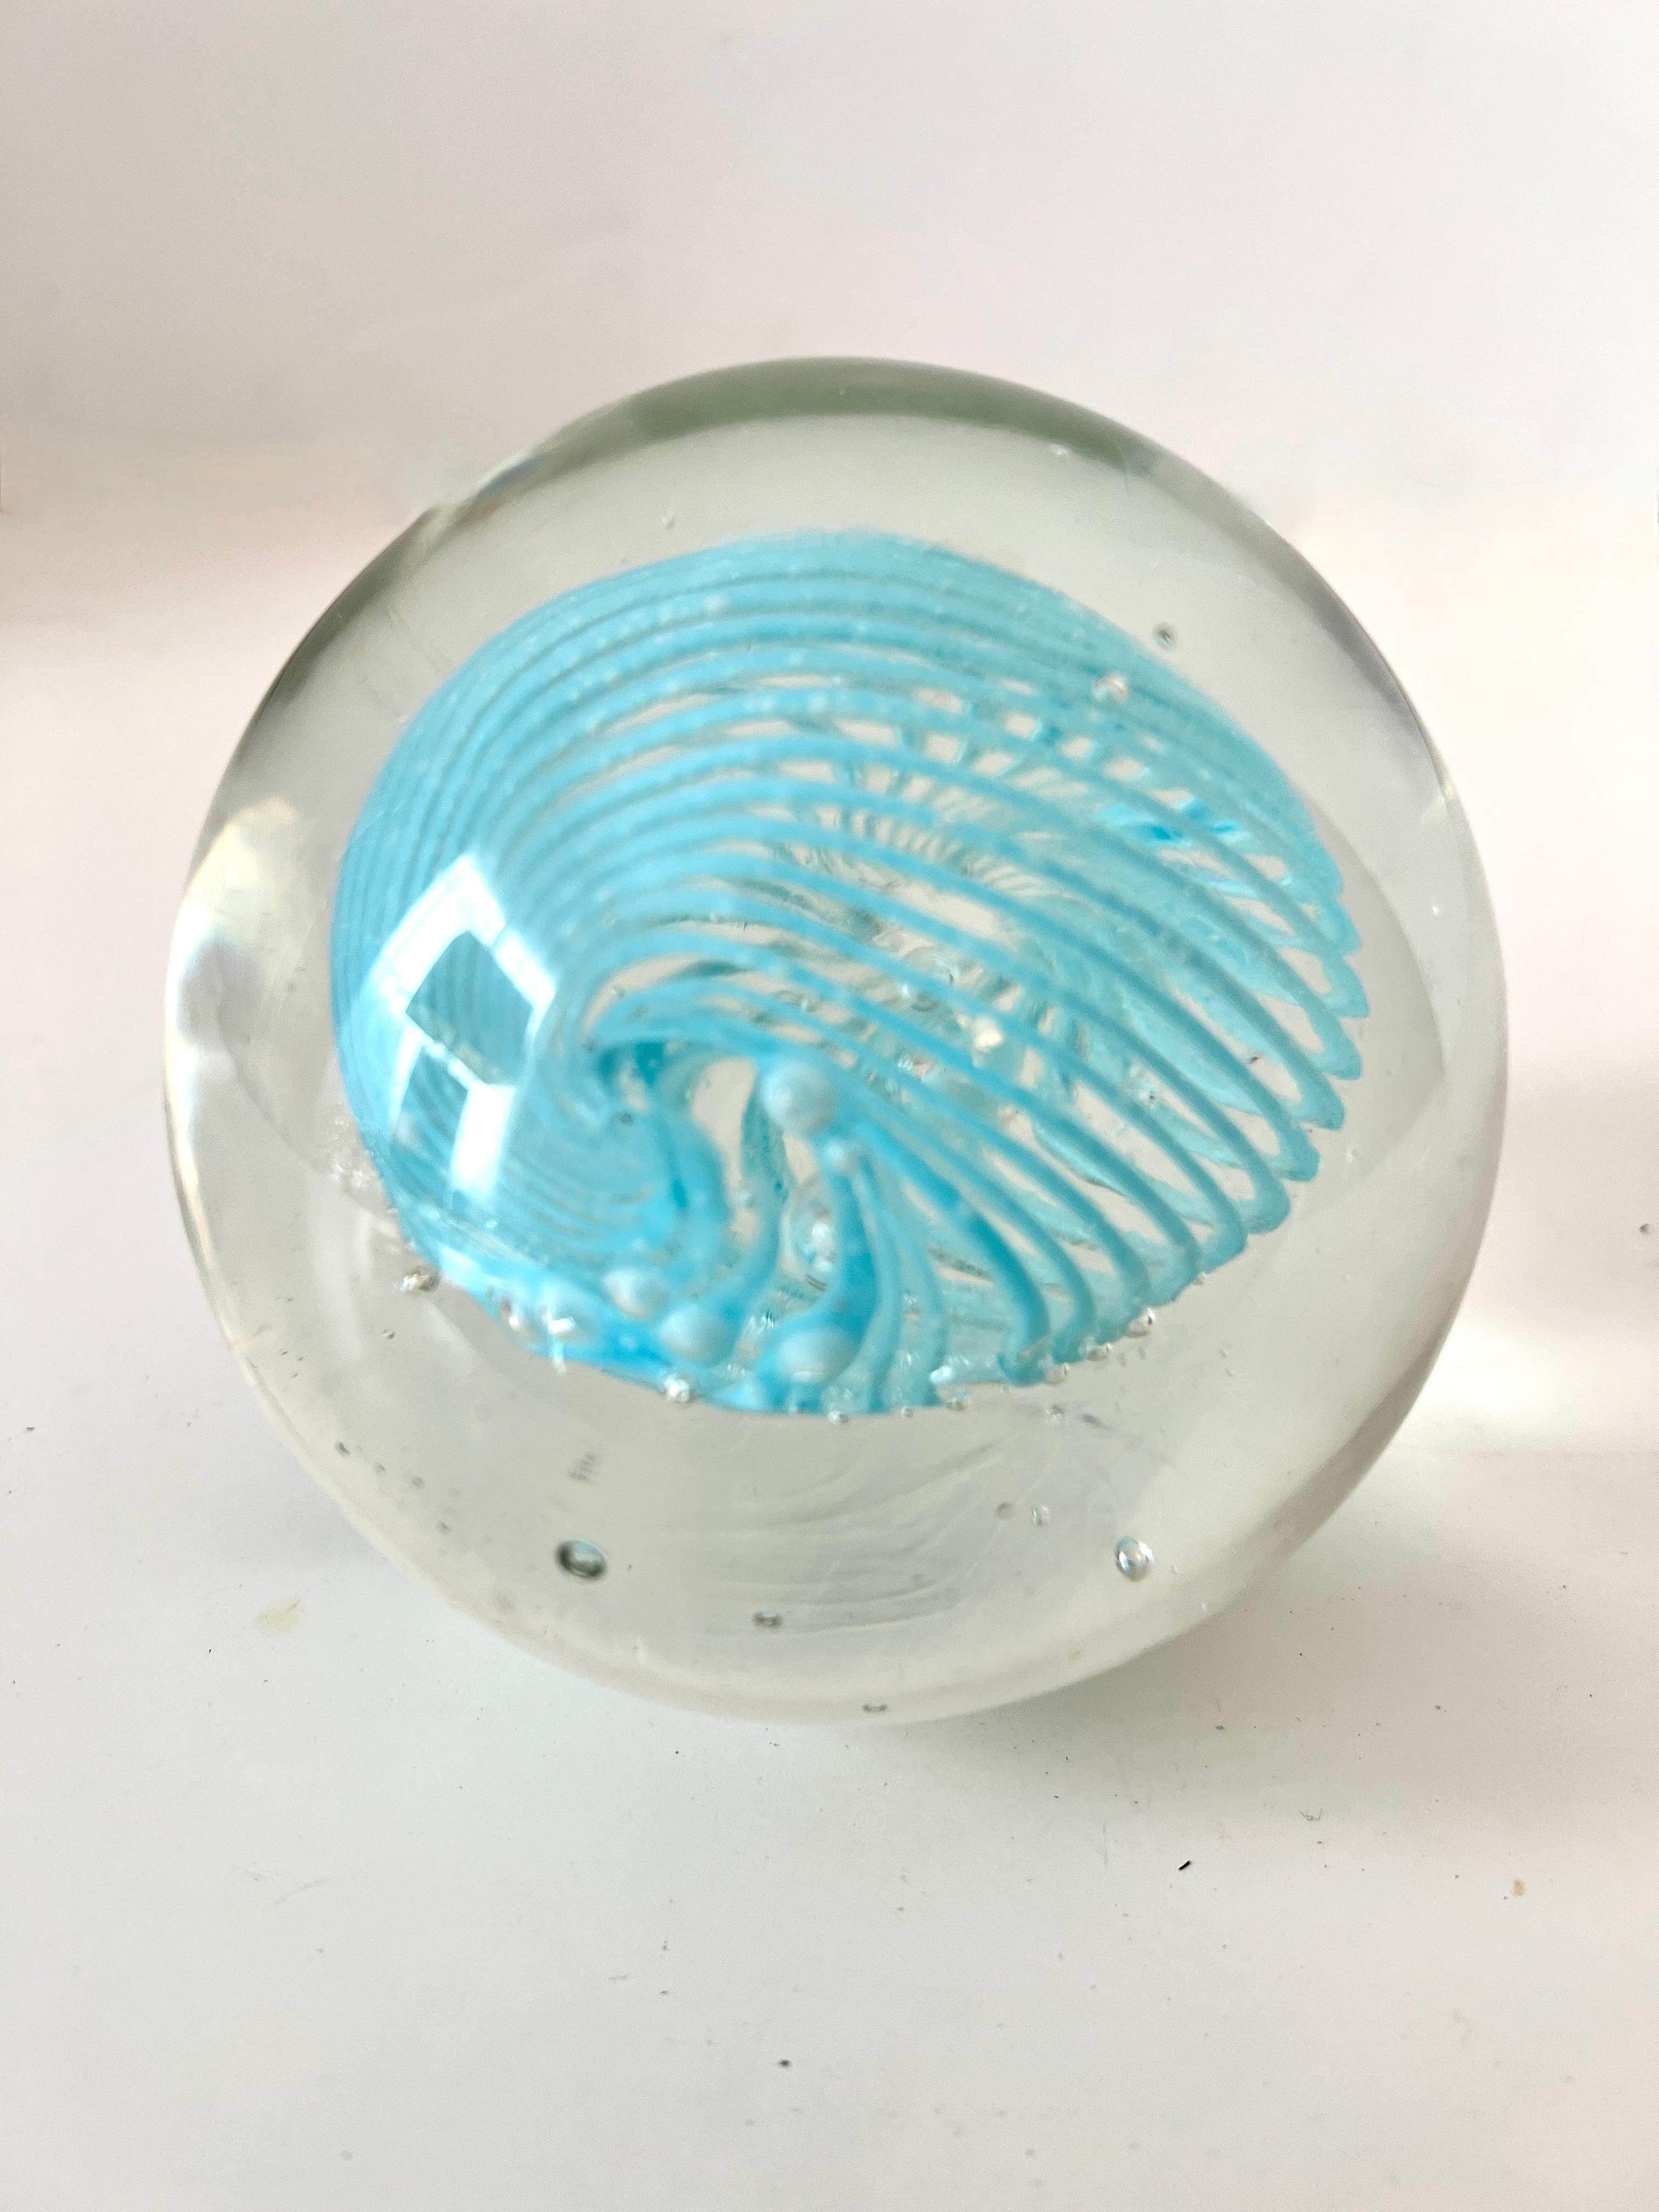 what does the glass paperweight symbolize